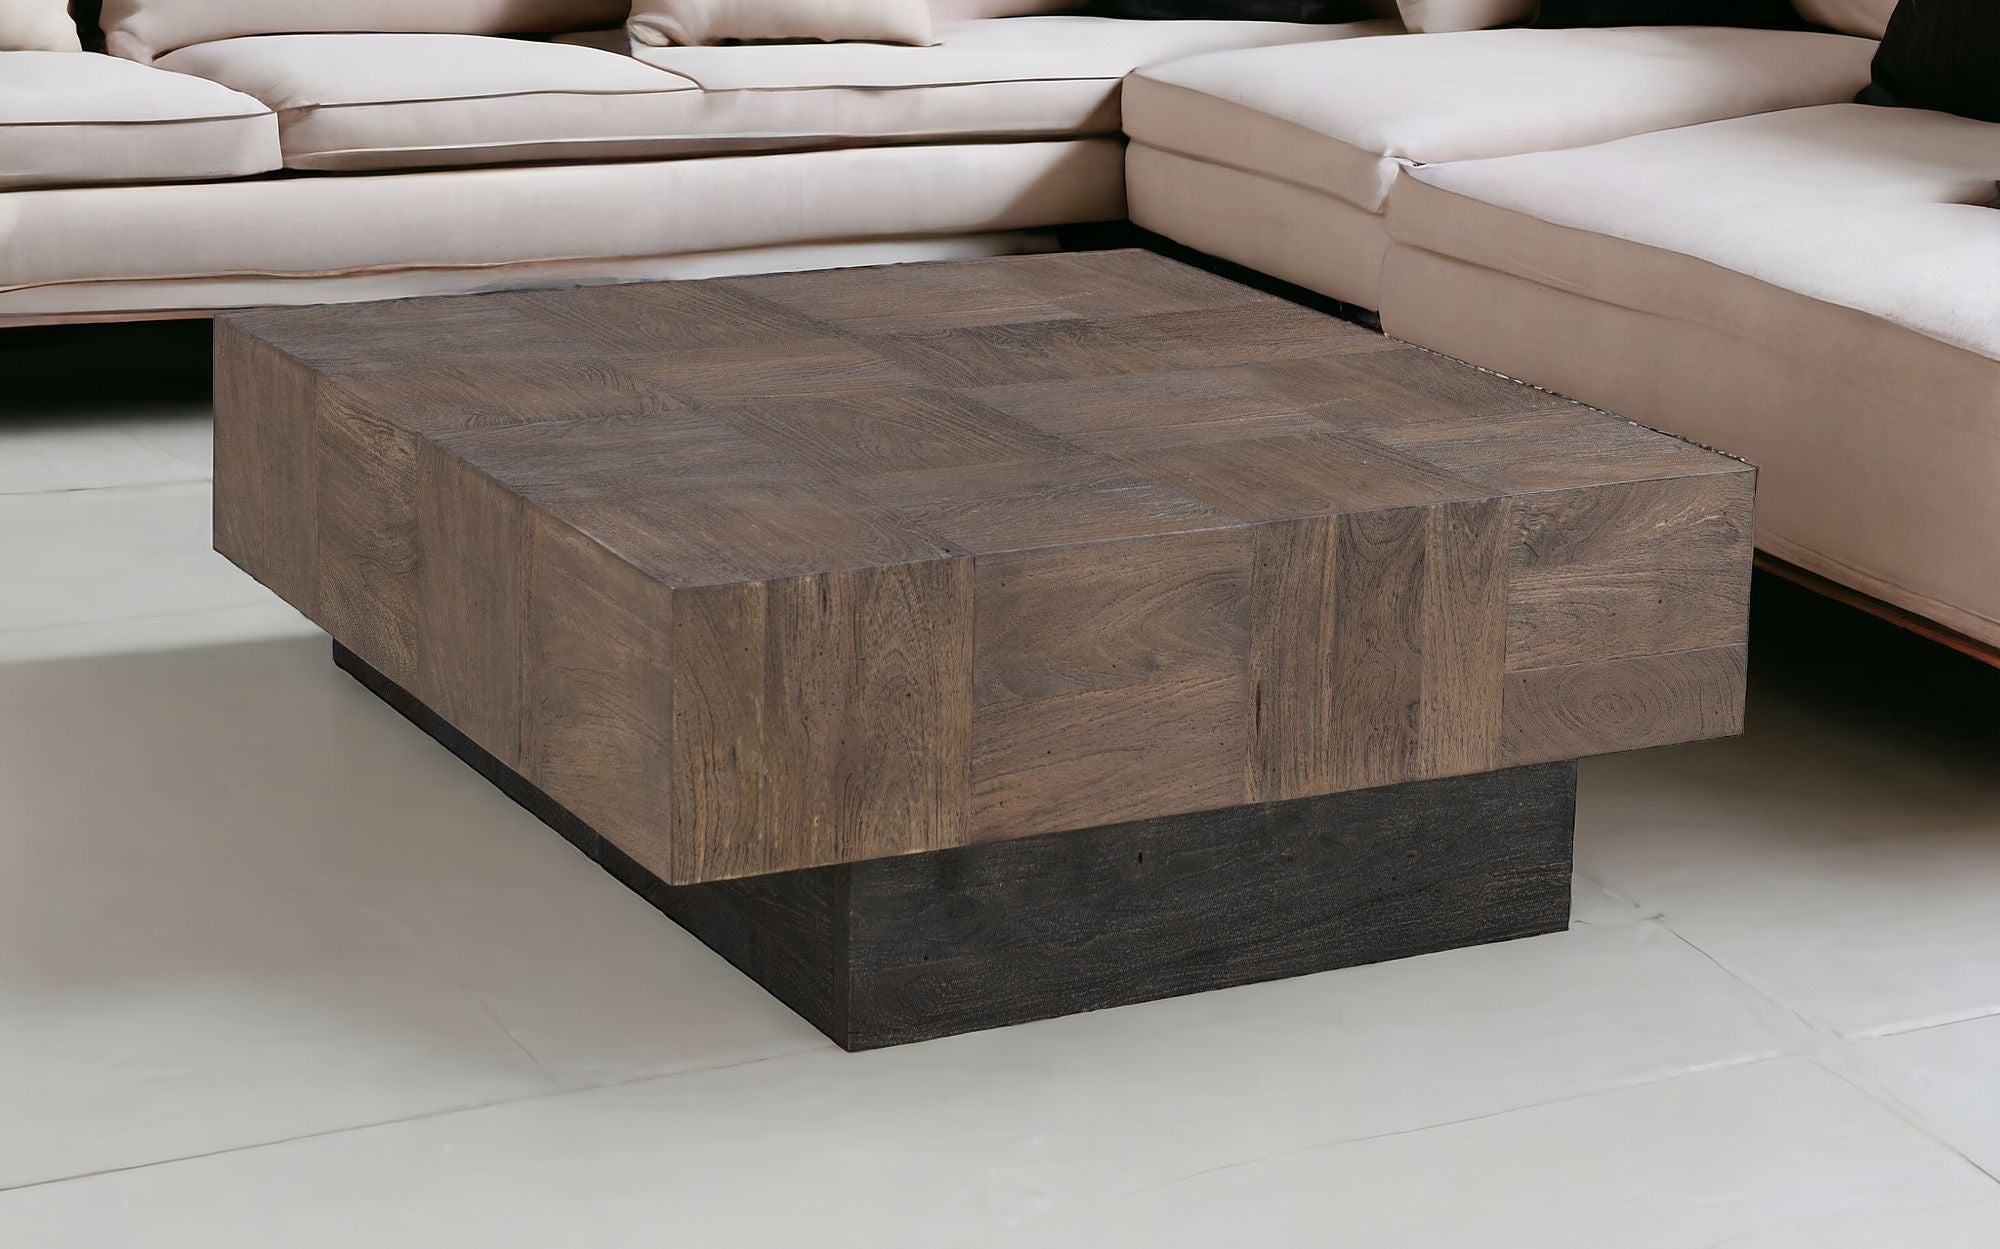 40" Dark Brown And Black Solid Wood Square Coffee Table